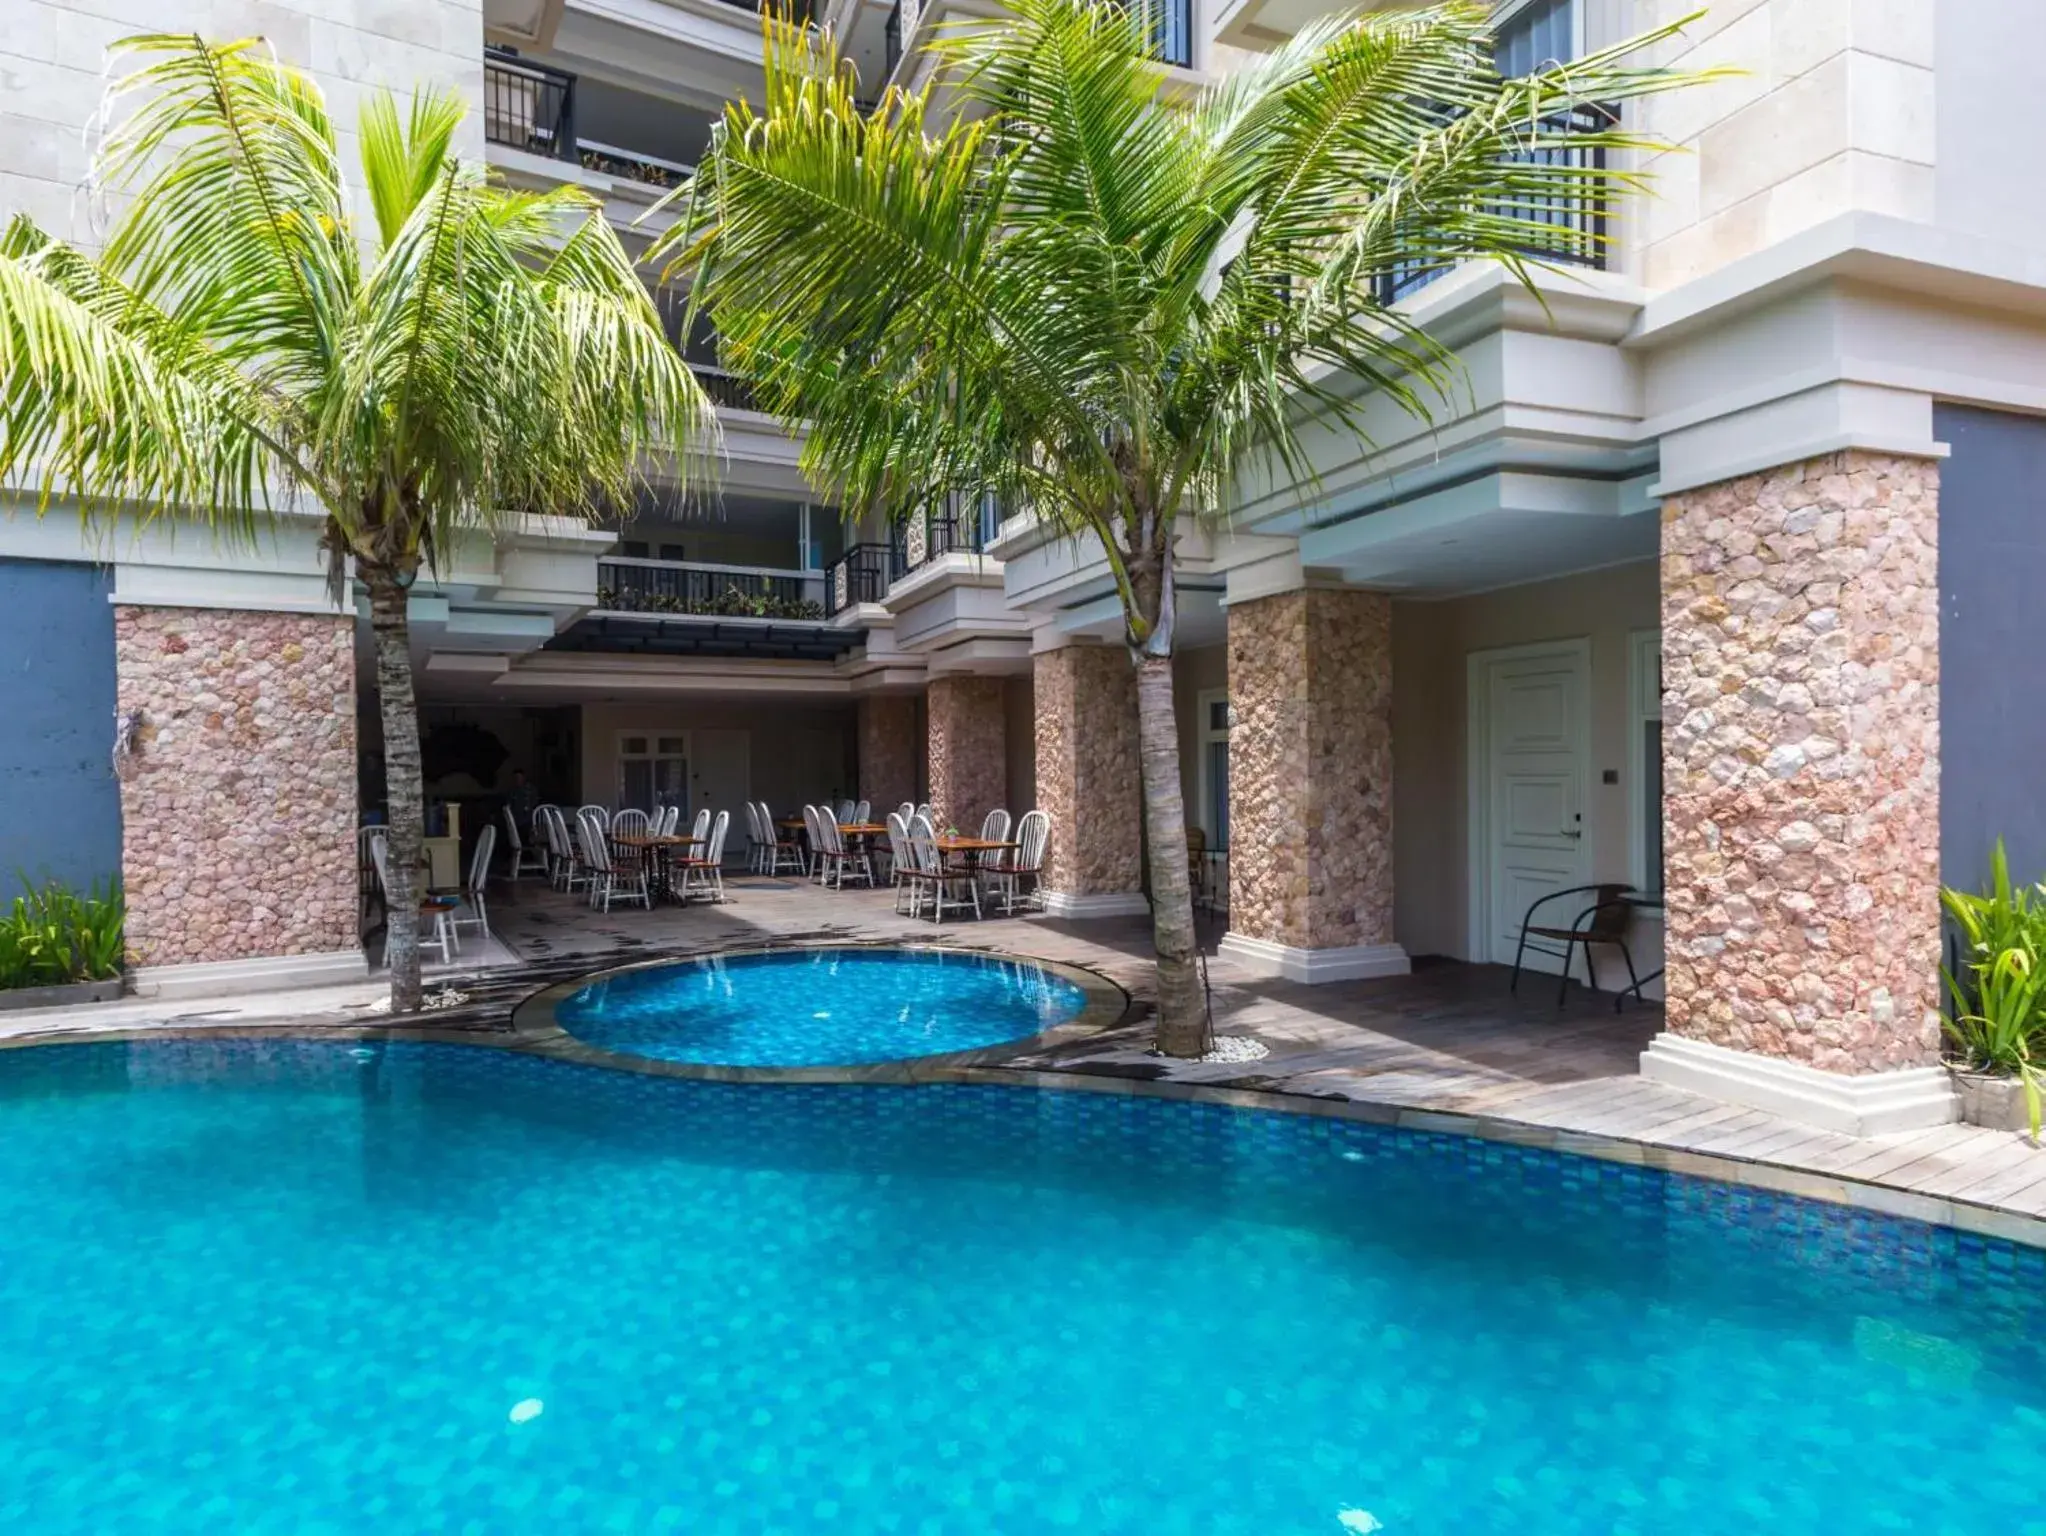 Property building, Swimming Pool in Alron Hotel Kuta Powered by Archipelago